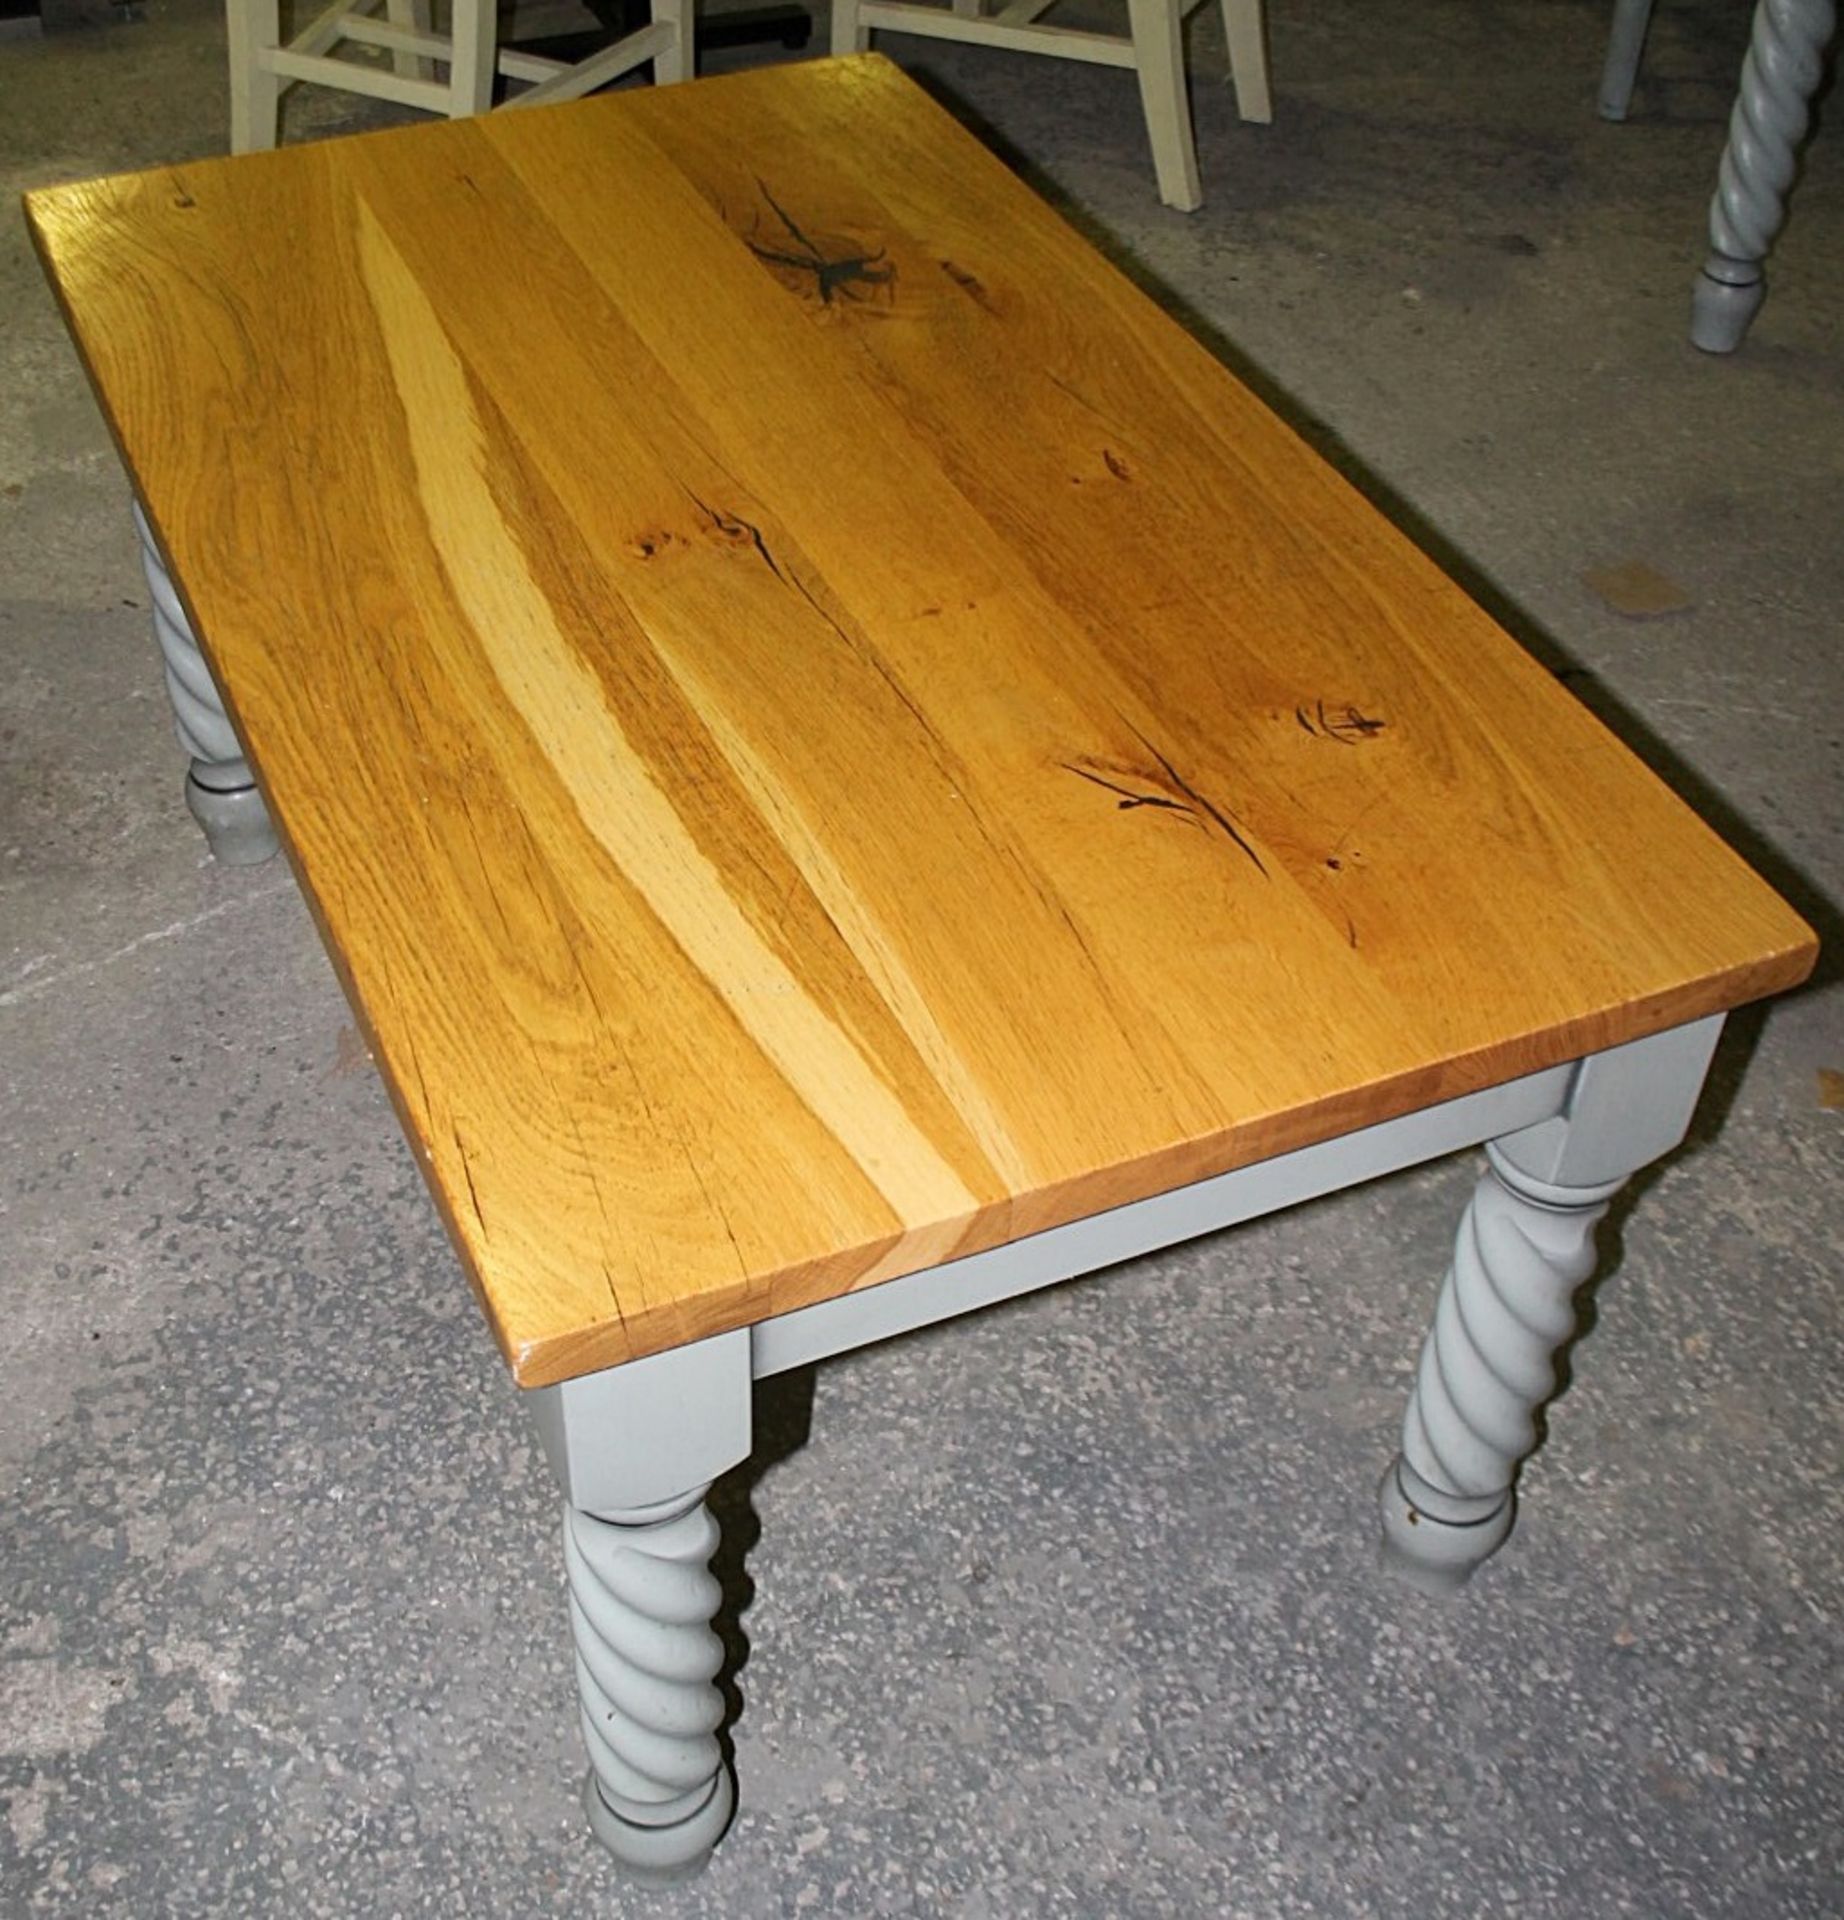 1 x Solid Wood Farmhouse Low Coffee Table - Features A Solid Oak Table Top - Image 2 of 4